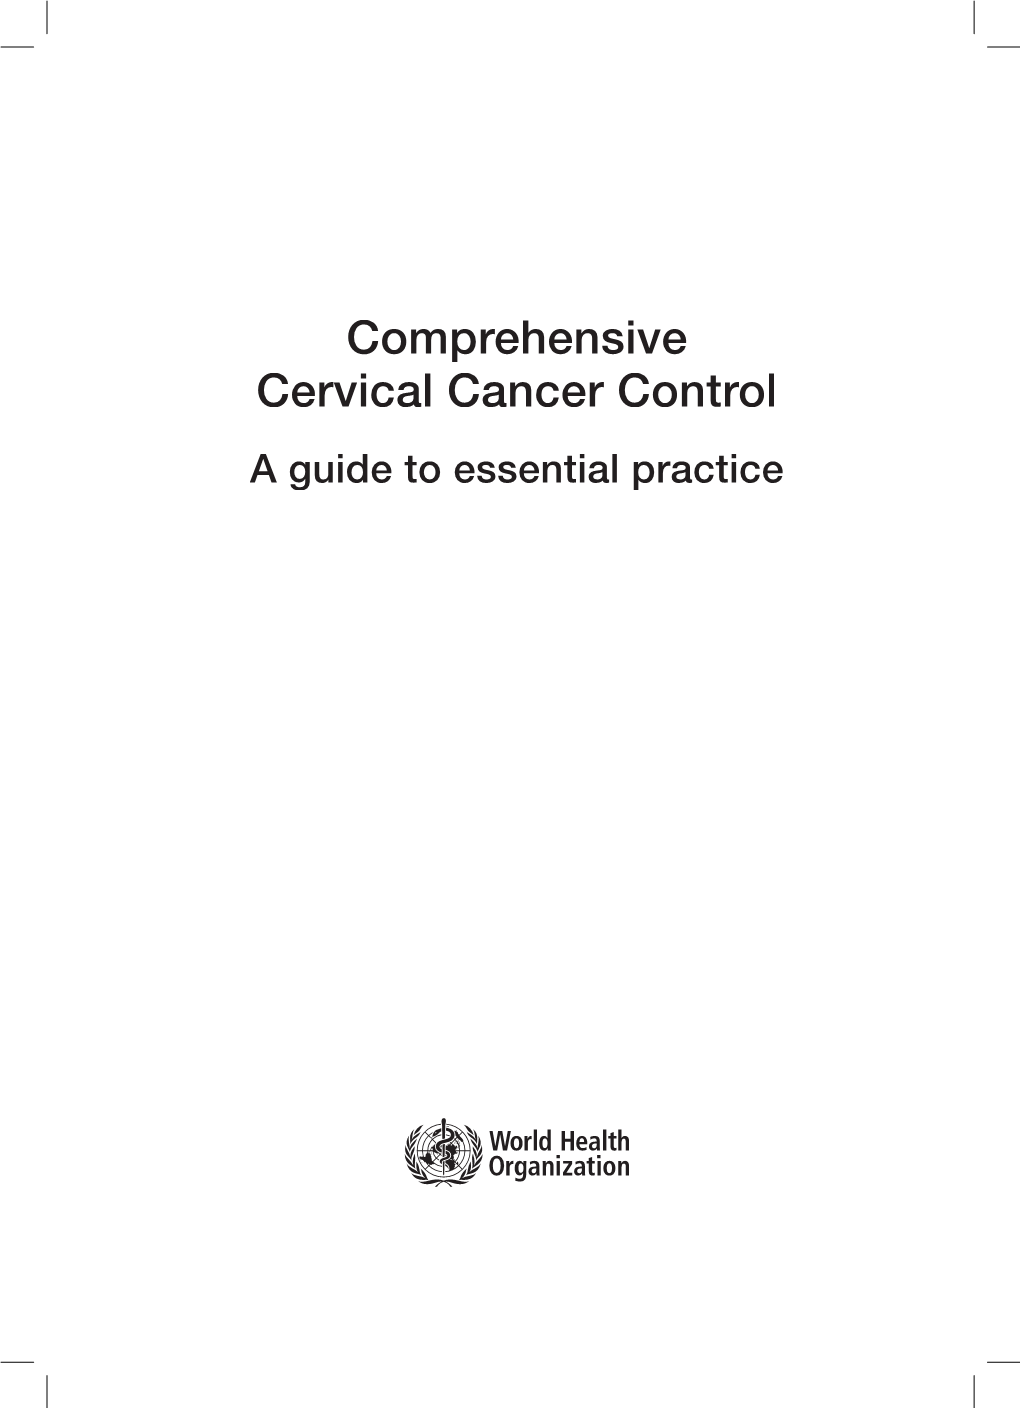 Comprehensive Cervical Cancer Control a Guide to Essential Practice WHO Library Cataloguing-In-Publication Data